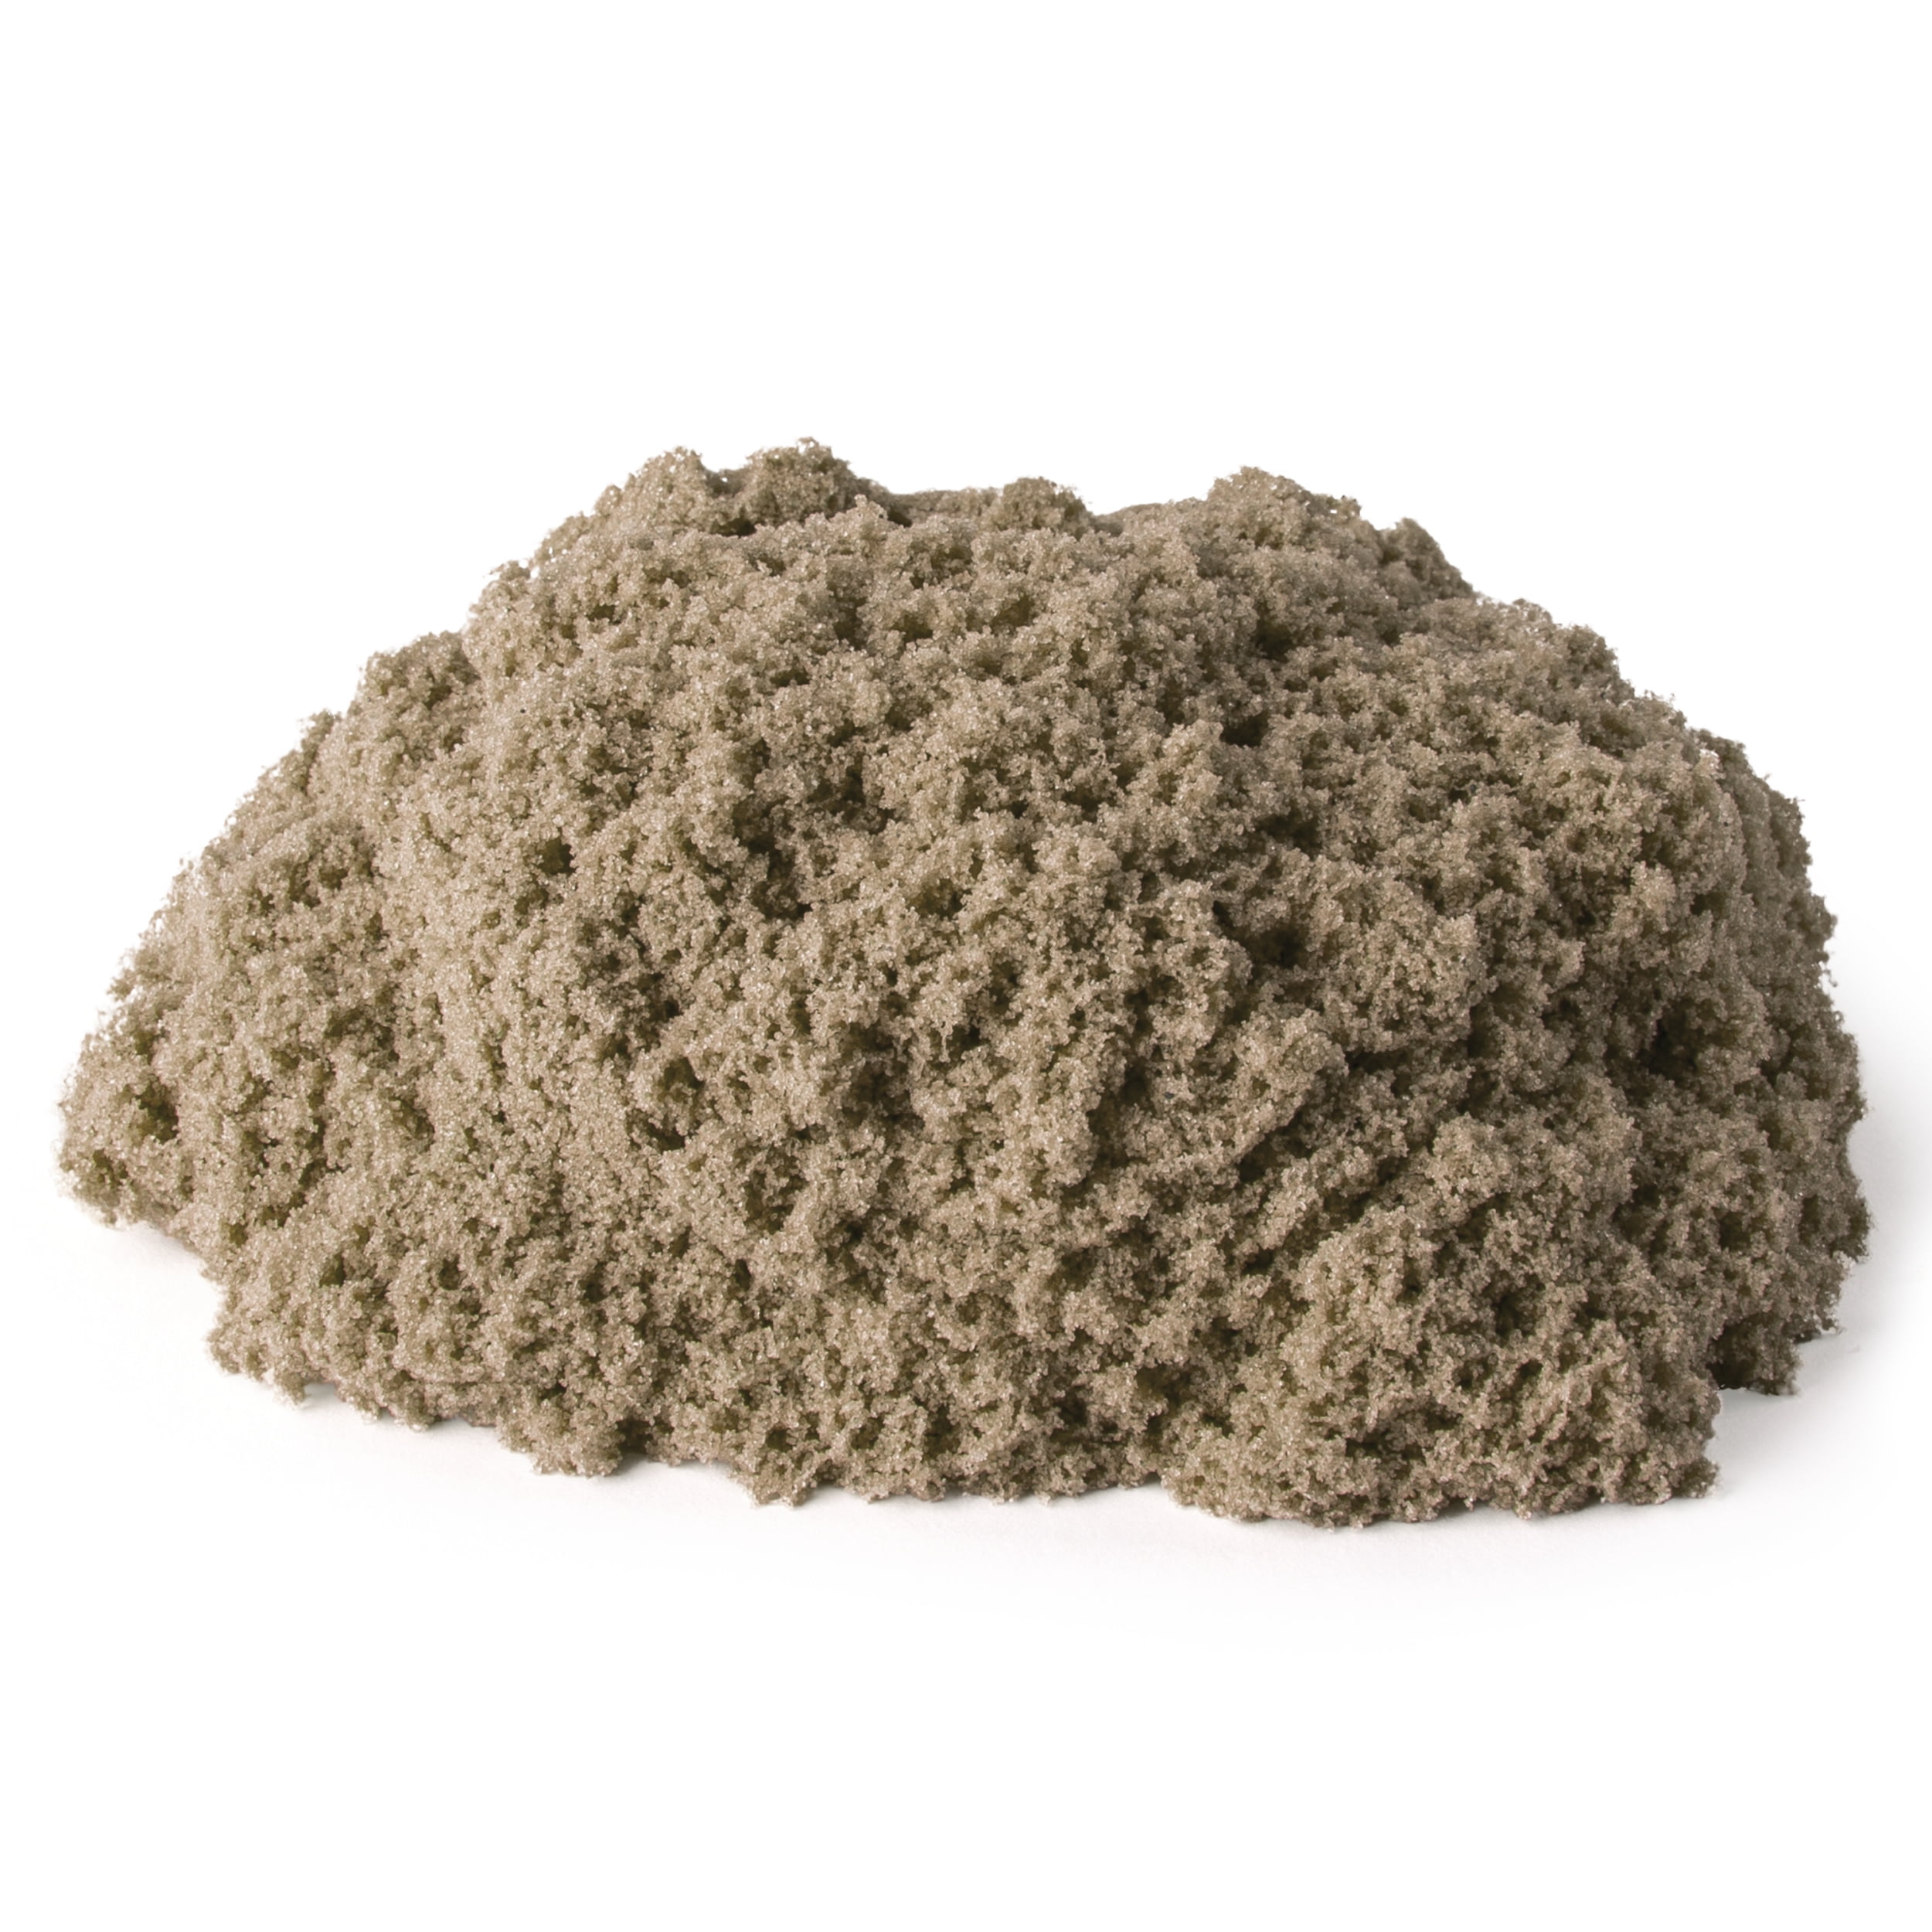 Kinetic Sand - Single Container - 4.5 oz - Brown